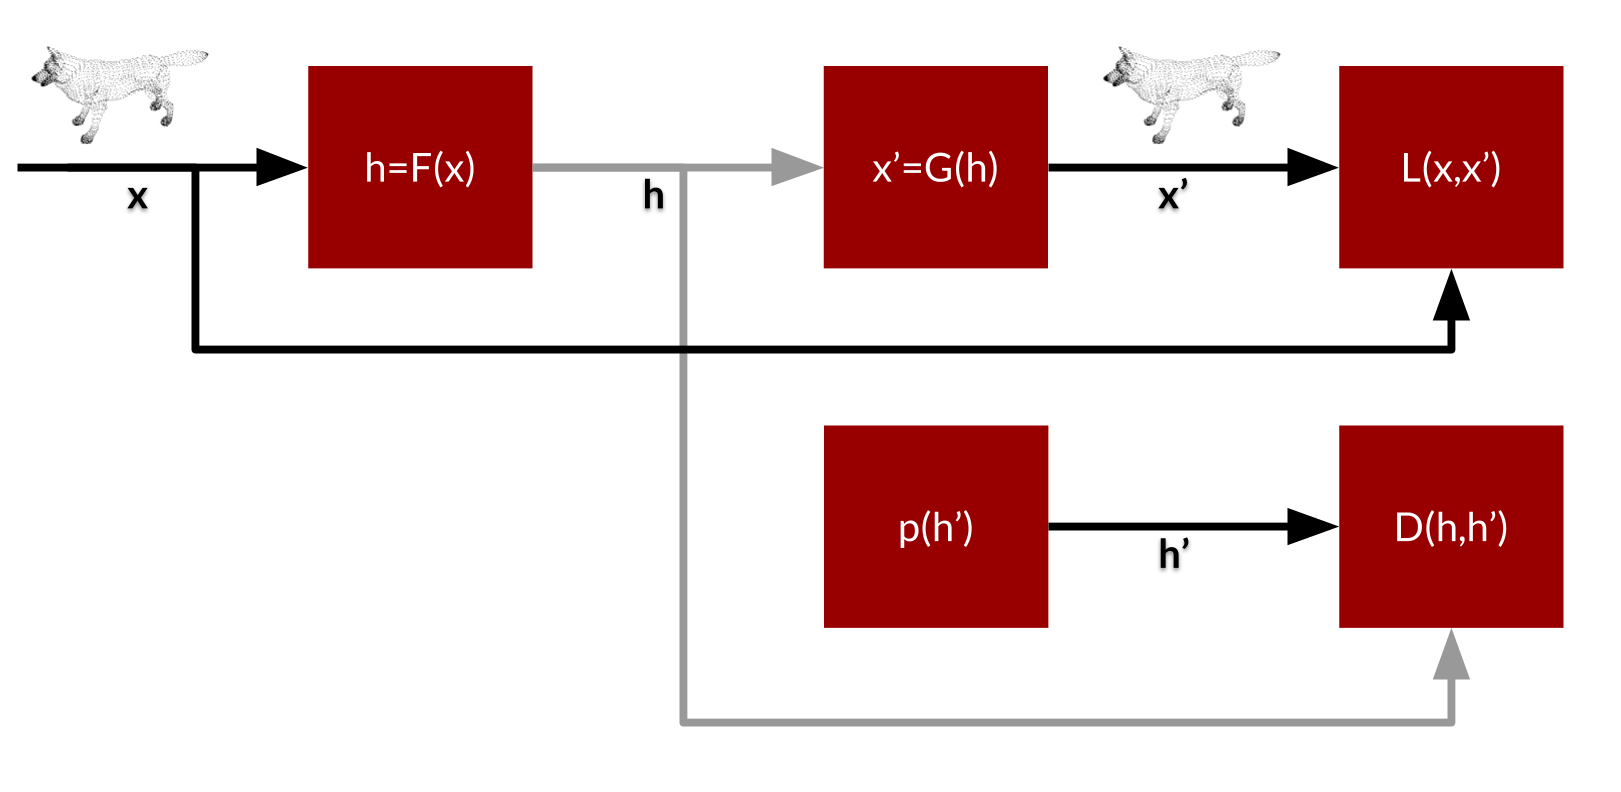 Adversarial Autoencoder. The latent variables (code) are denoted by h. Samples are drawn from e.g. a Normal distribution p(h). The discriminator (bottom-right) has the task to distinguish positive samples h' from negative samples h. Preferably p(h) will look like p(h') in the end. In the meantime the top row is reconstructing the image x from h as well.